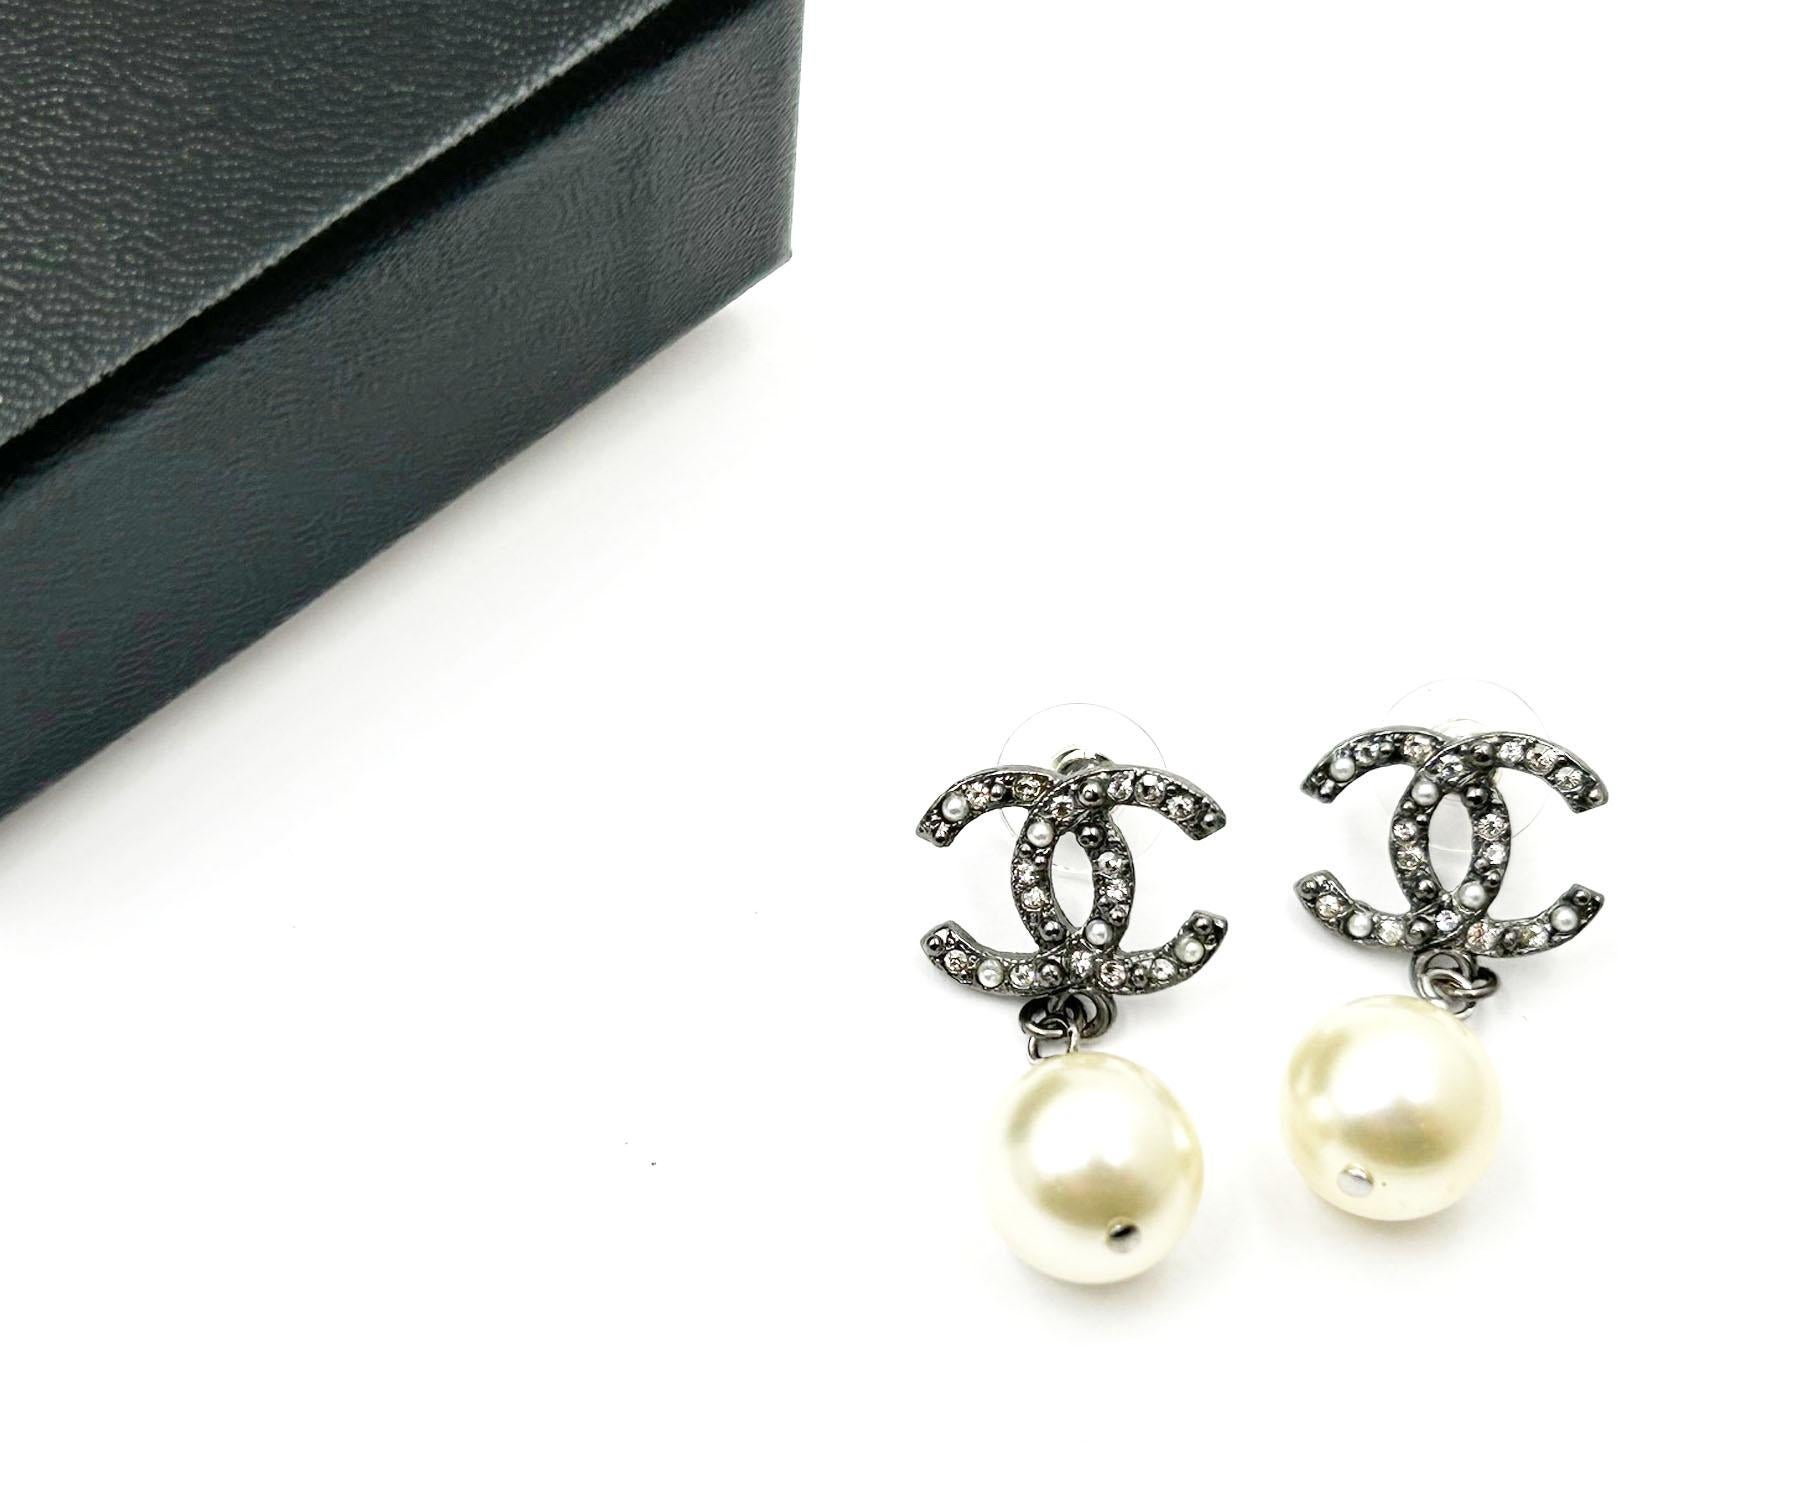 Chanel Classic Gunmetal CC Crystal Faux Pearl Dangle Piercing Earrings

*Marked 13
*Made in France
*Comes with the original box

-It is approximately 1.35